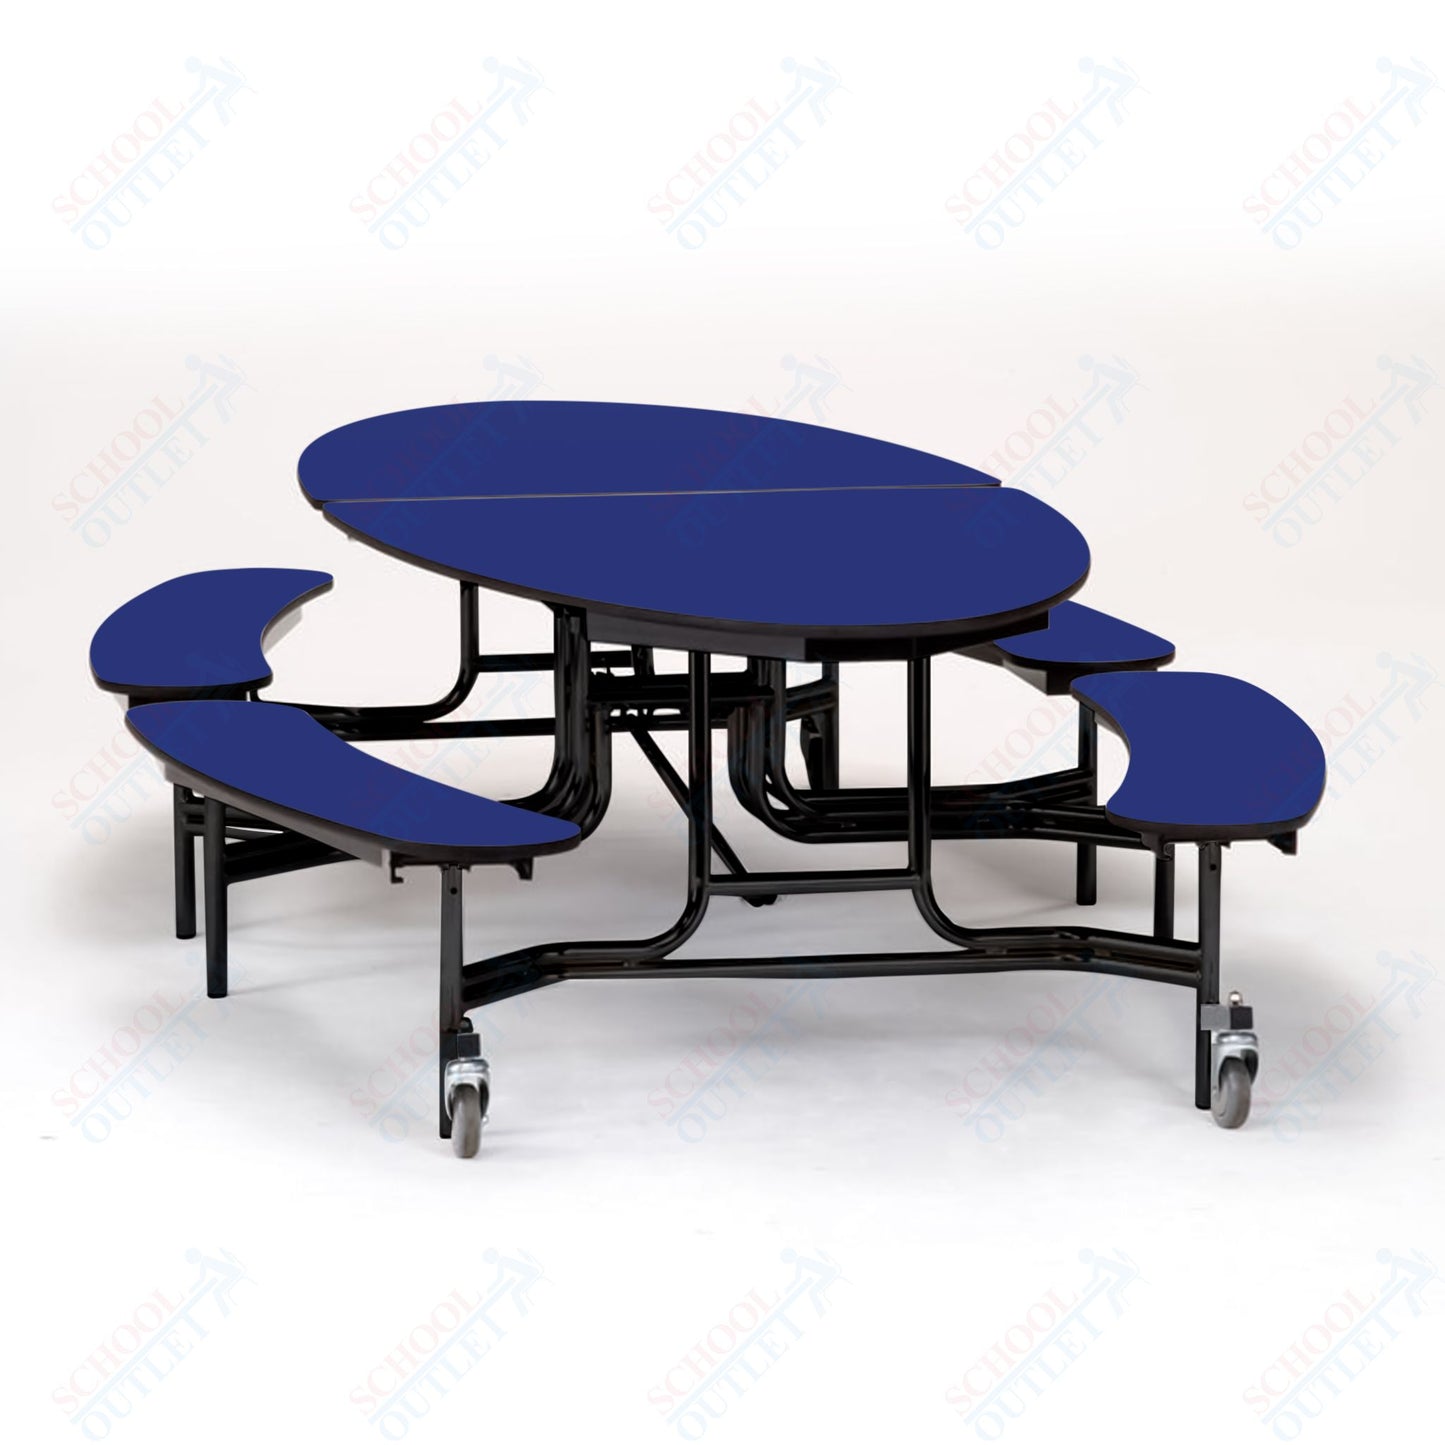 NPS Mobile Cafeteria 10' Elliptical Fixed Bench Unit - Seats 8-12 (National Public Seating NPS-METB)